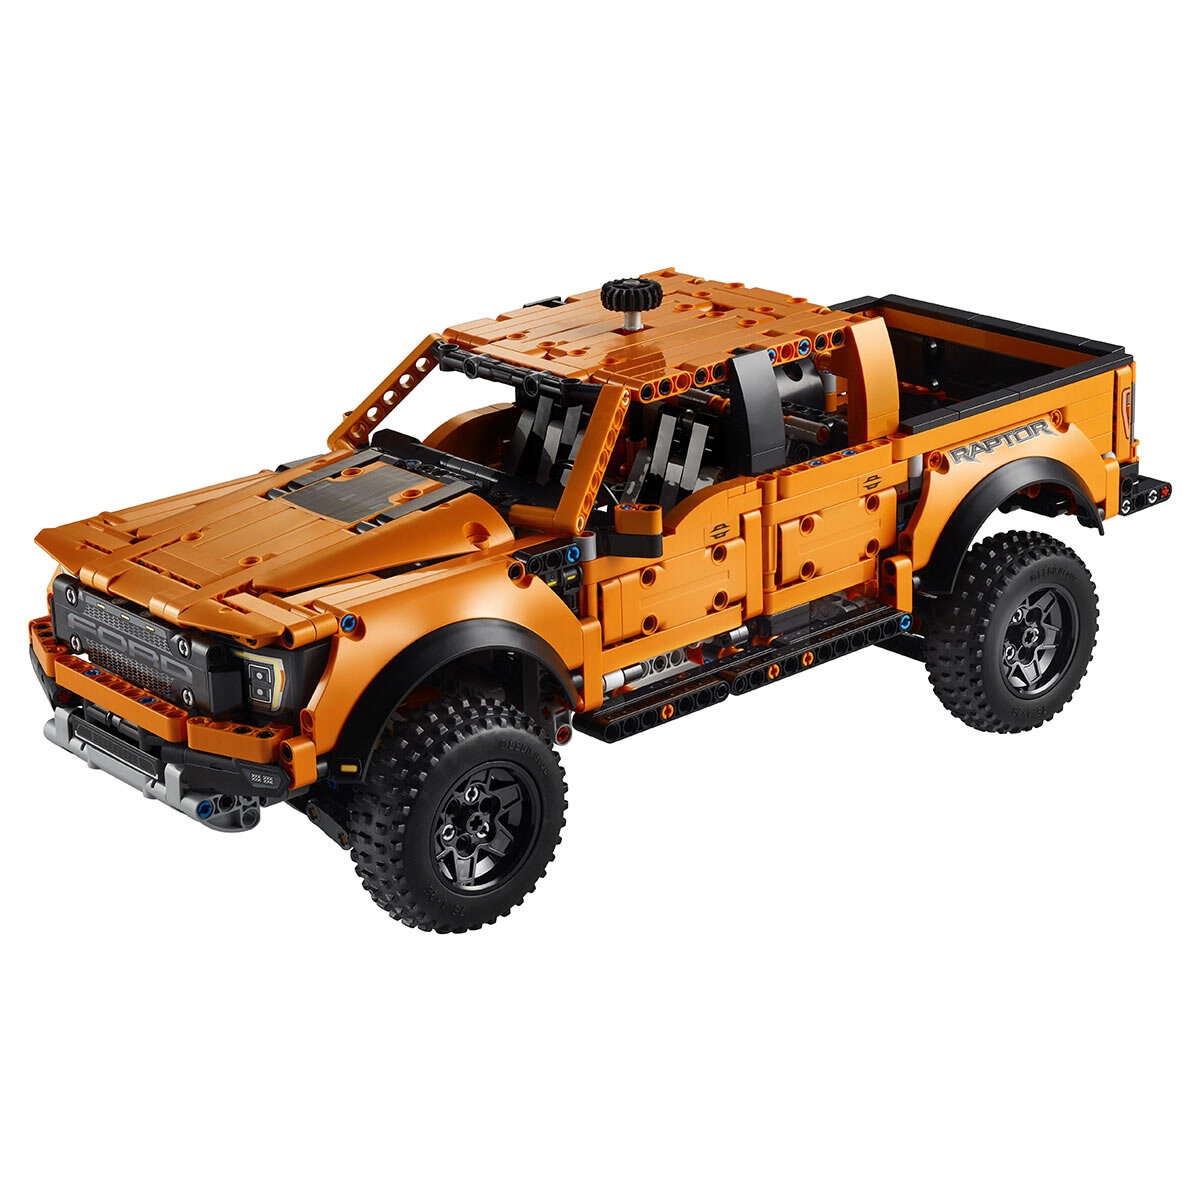 Buy LEGO Technic Ford Raptor Overview2 Image at Costco.co.uk